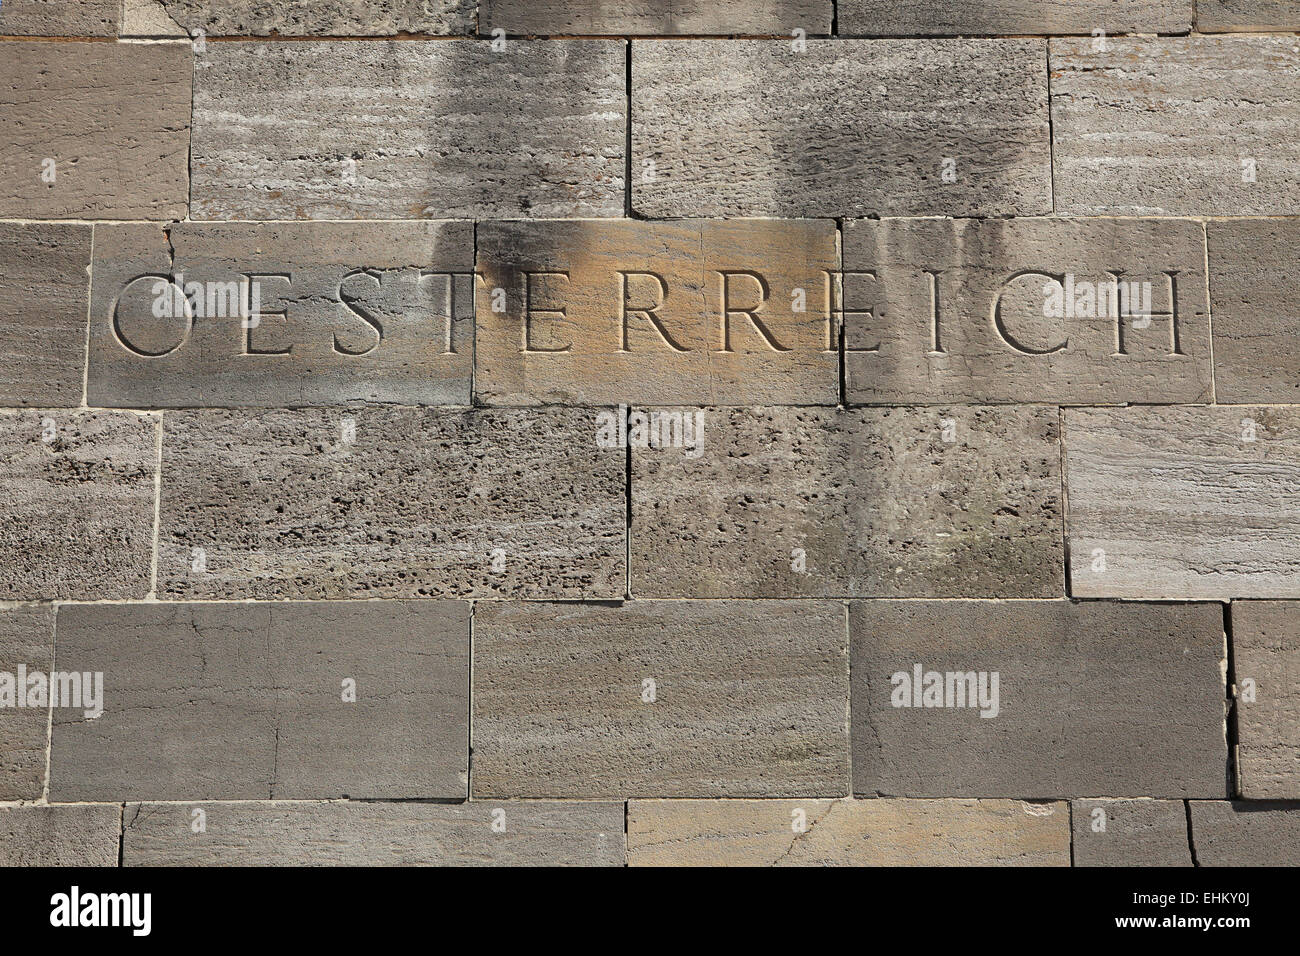 Osterreich (Austria). Word carved into the stone blocks. Stock Photo